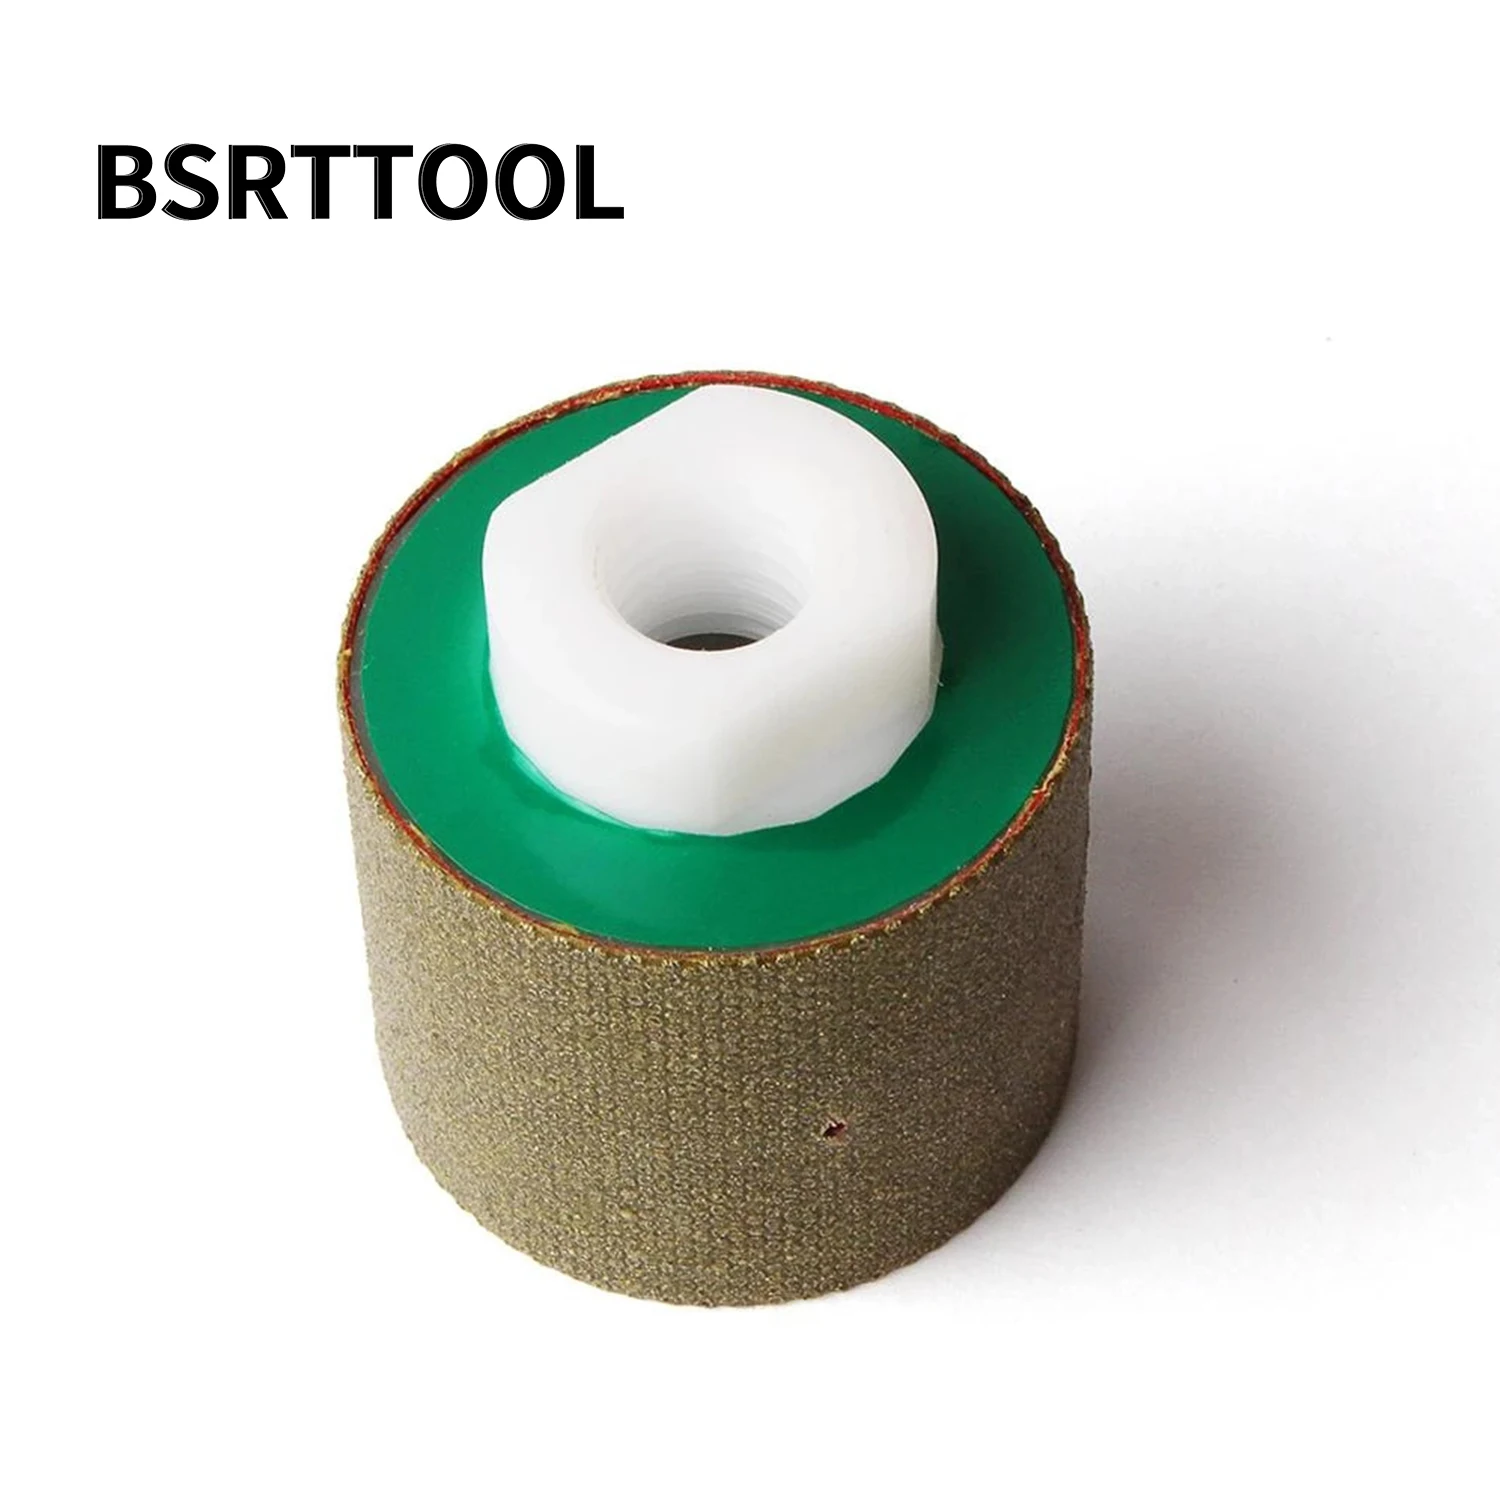 

BSRTTOOL 2" 1 PC Diamond Polishing Drum Wheels M14 5/8-11 Thread Electroplated Grinding Tool For Granite Marble Concrete Sanding